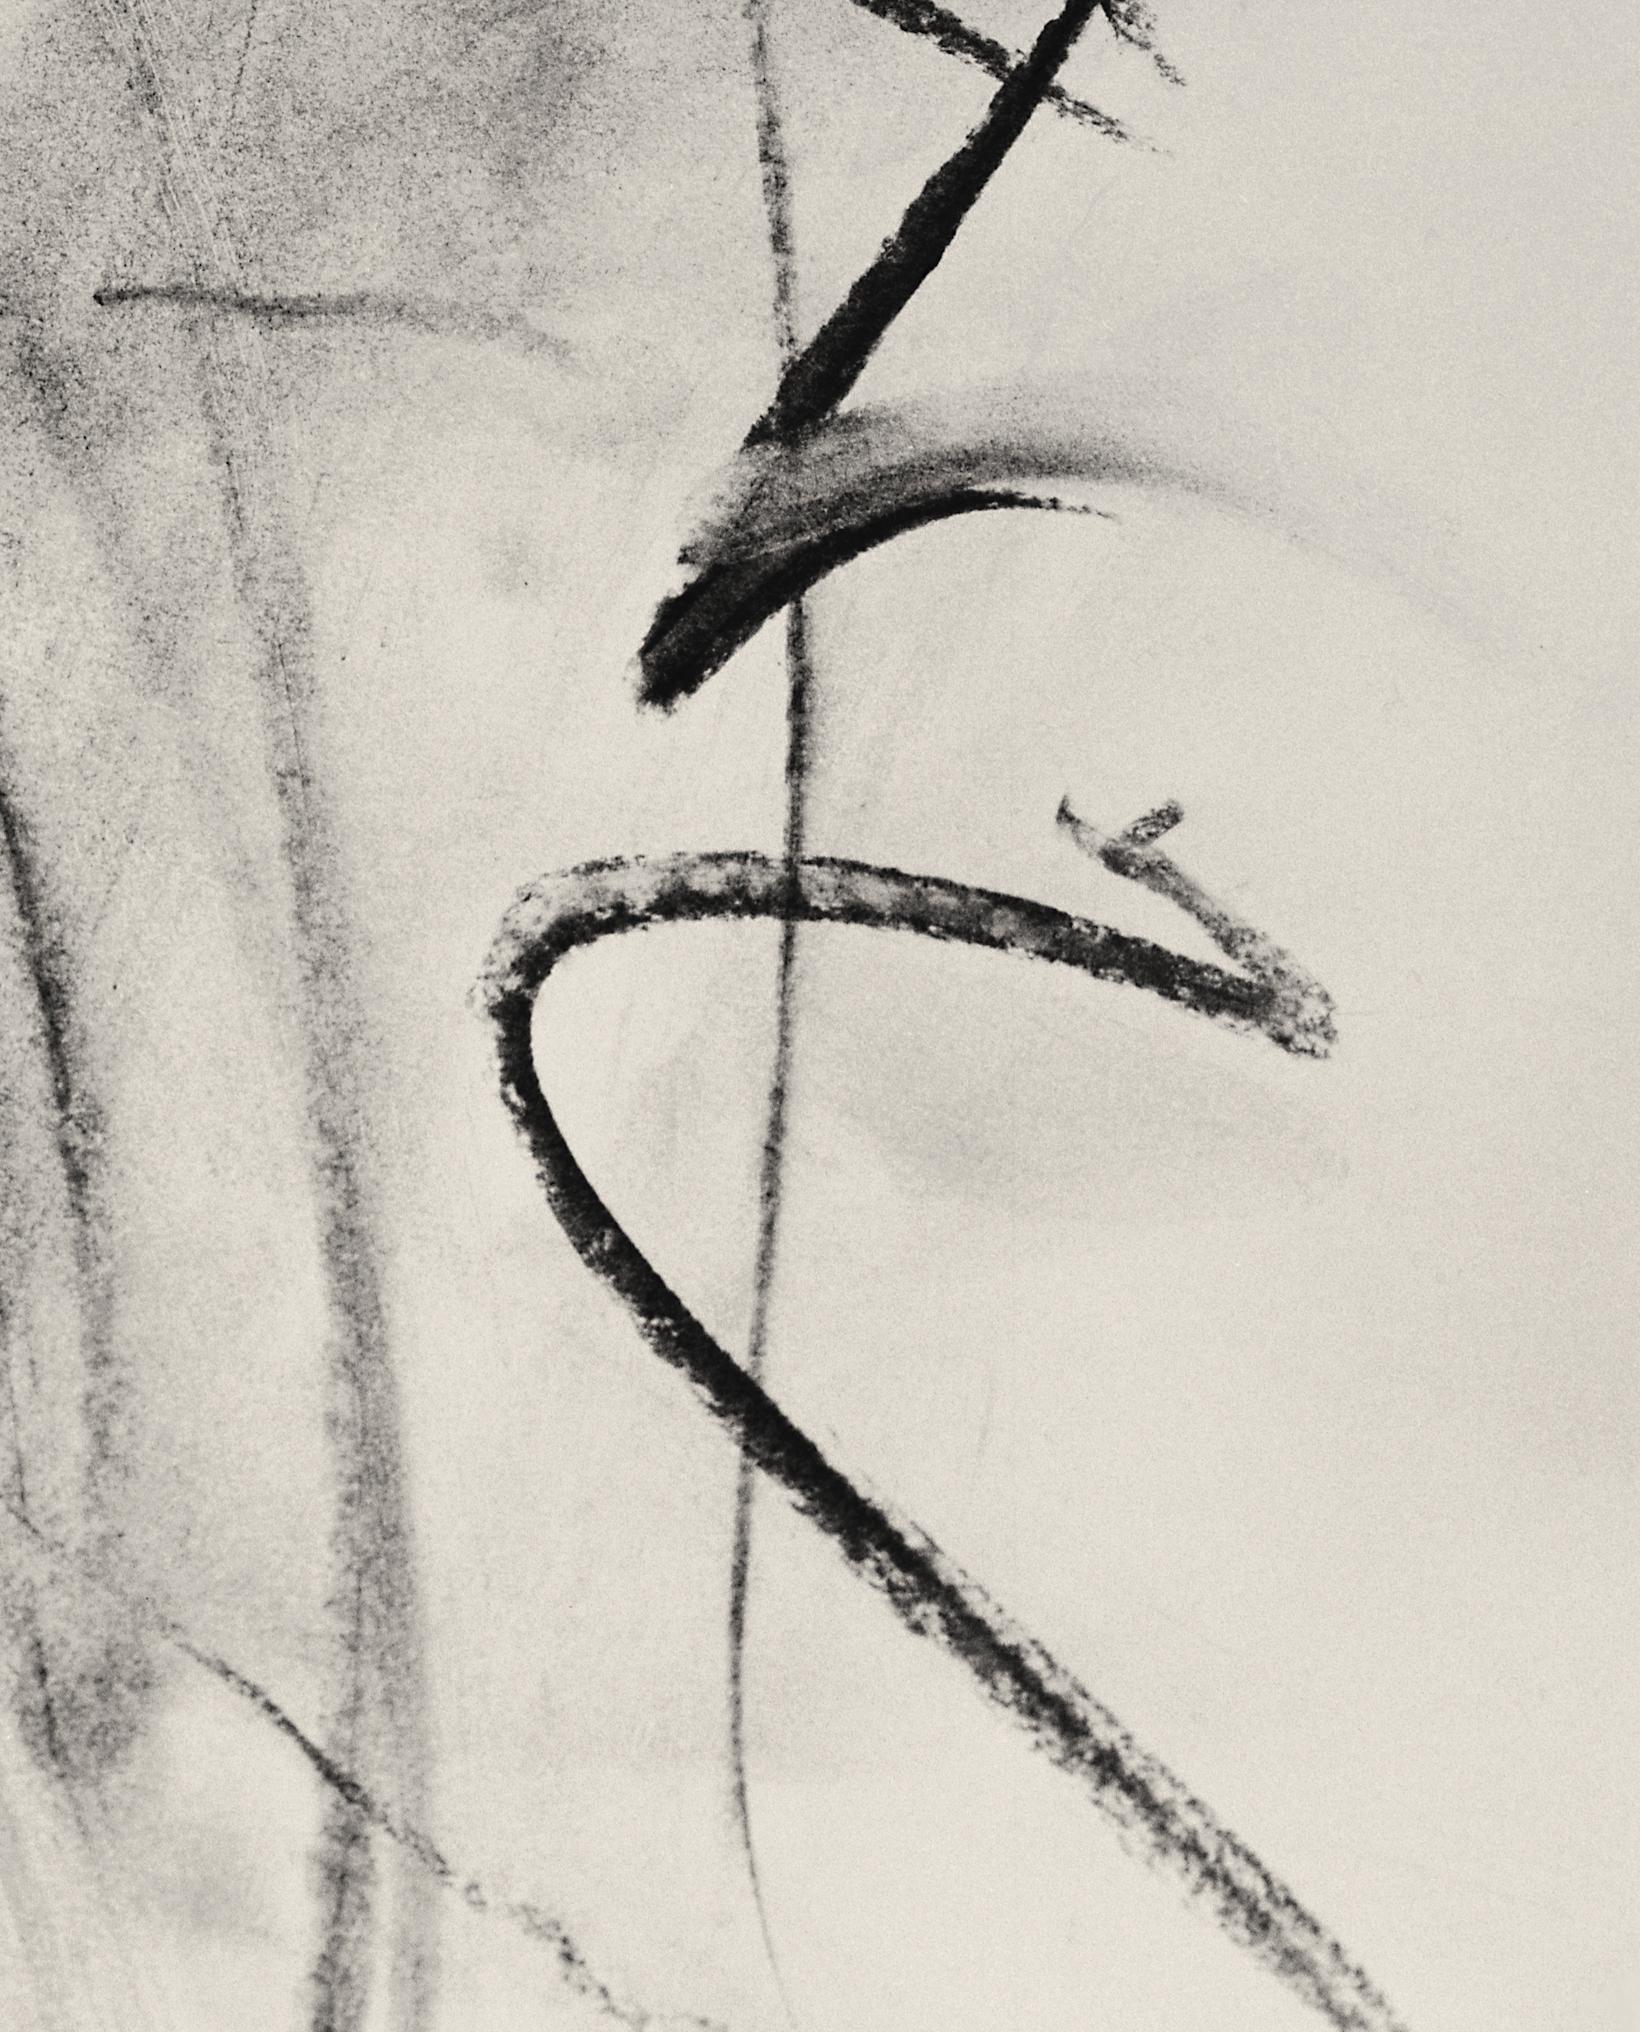 'Lilly in Charcoal' 2023

Abstract expressionism black and white photography of Charcoal abstract drawing and Lilly.
Photograph shot using mid-century large format film camera Linhof. 

From Limited edition of 20.

Printed on archival Hahnemühle